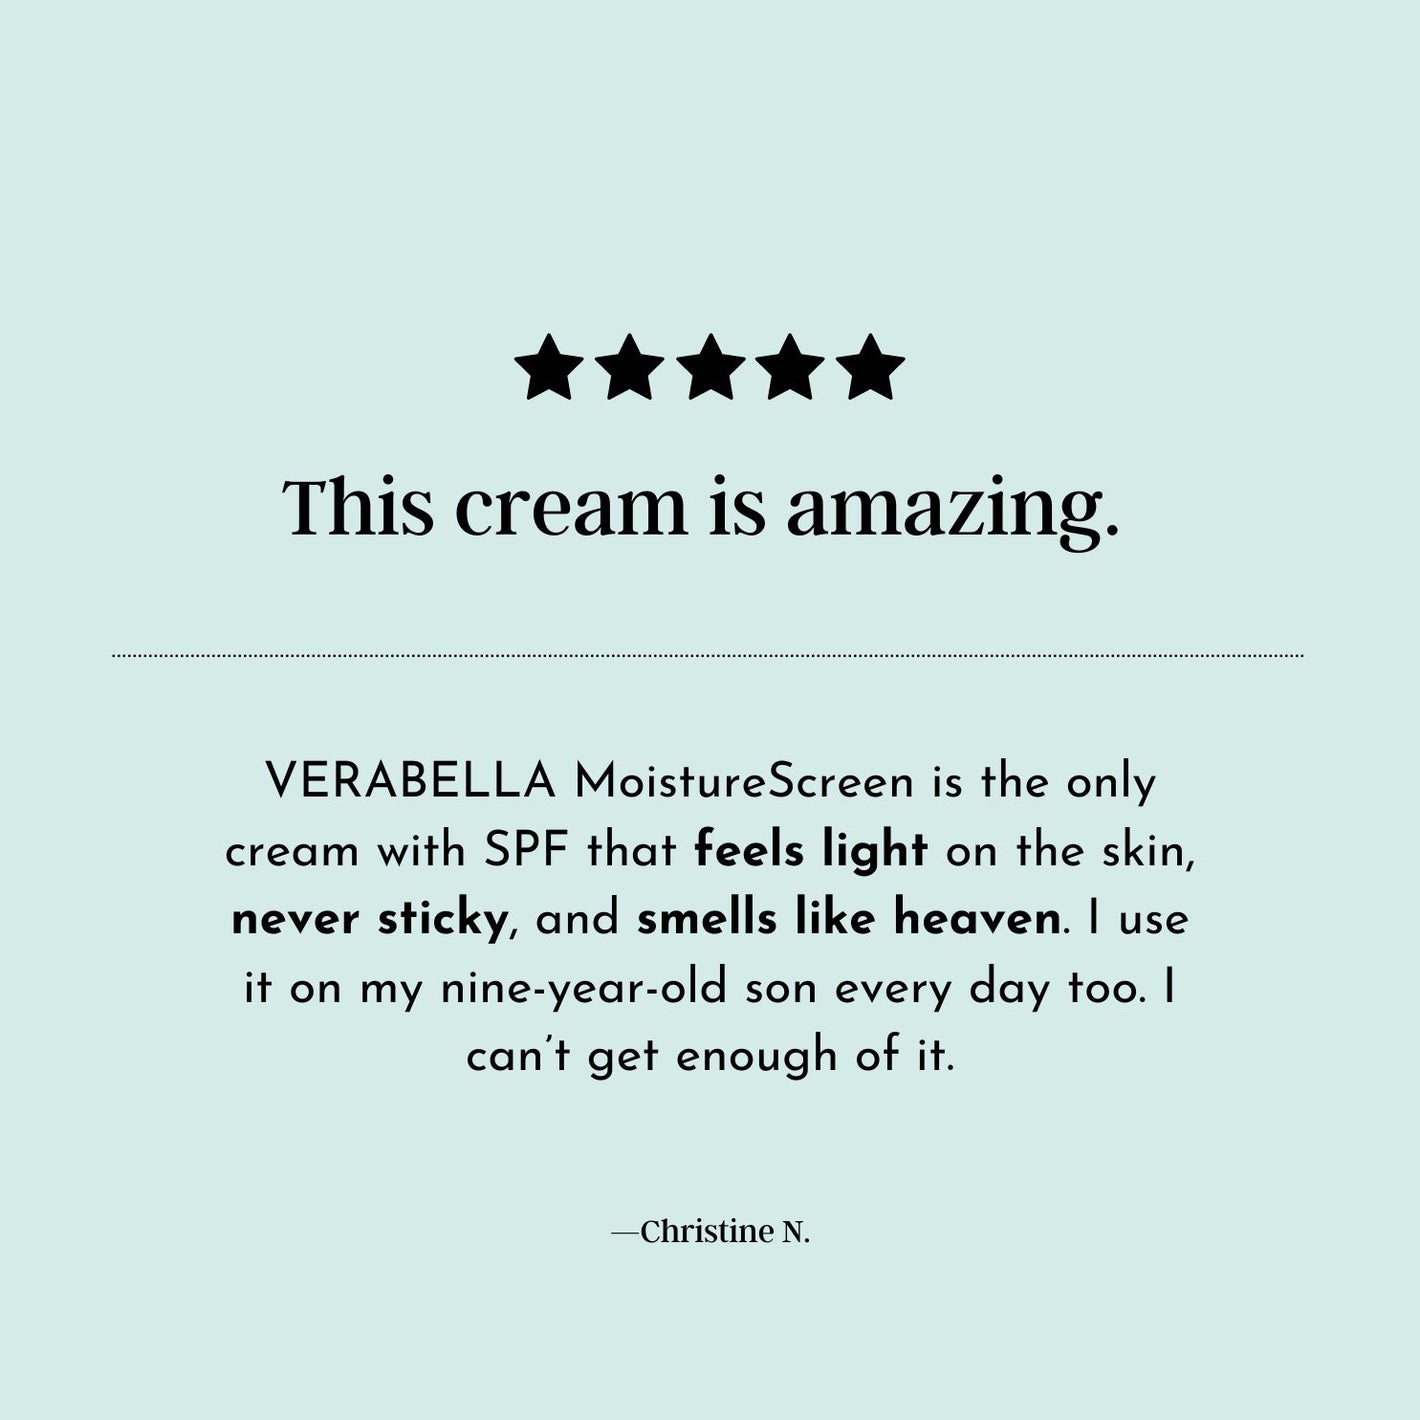 This cream is amazing. Verabella MoistureScreen feels light on the skin. Further details are provided below